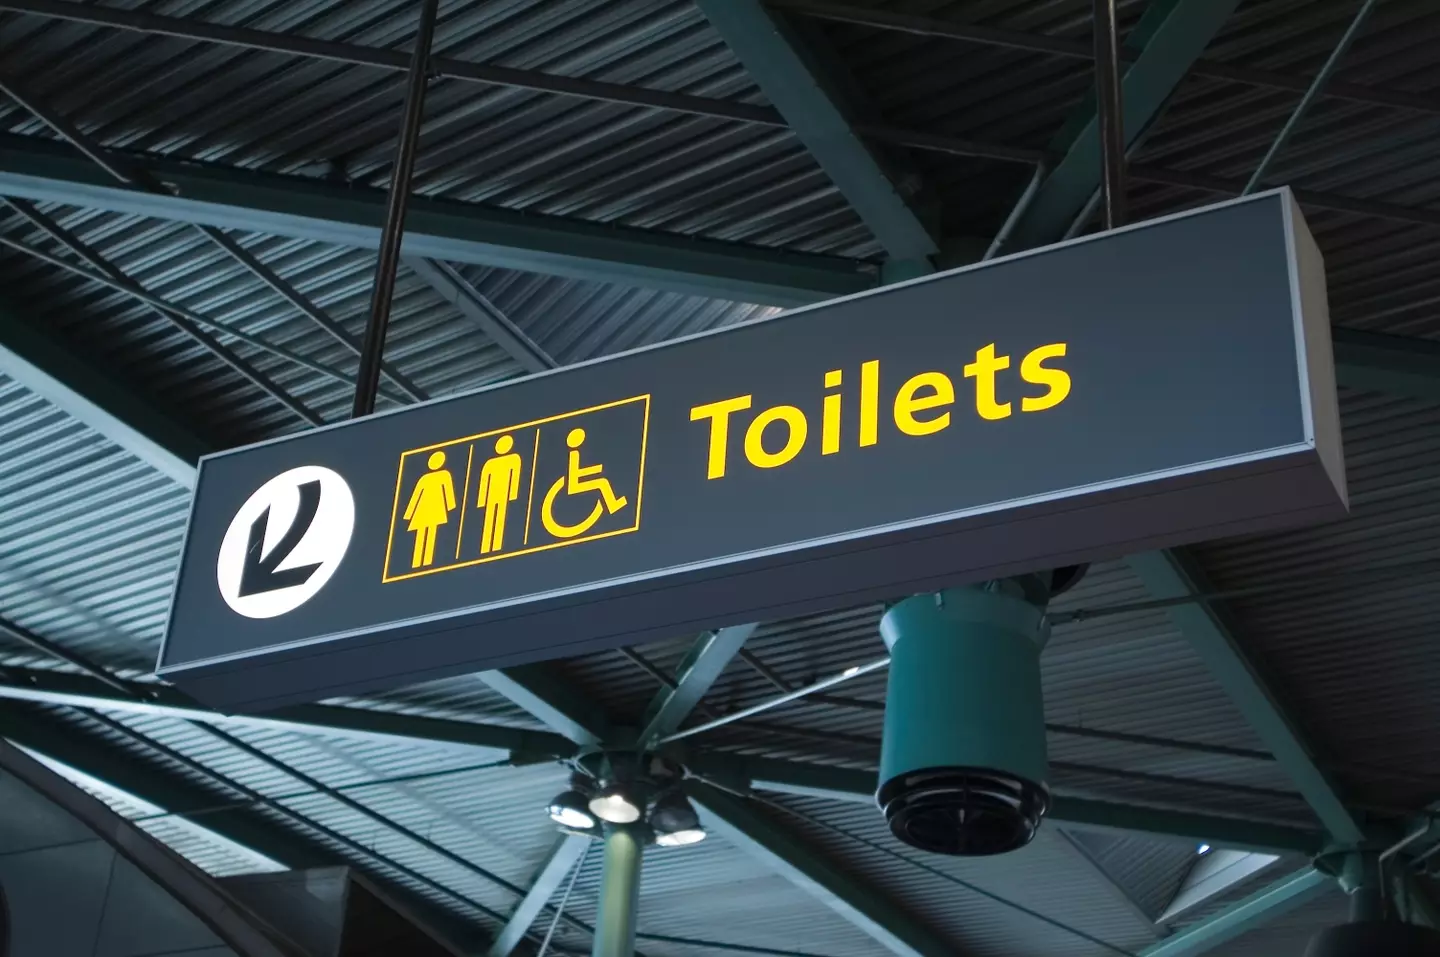 You don't want to use the toilet on the plane, do you?